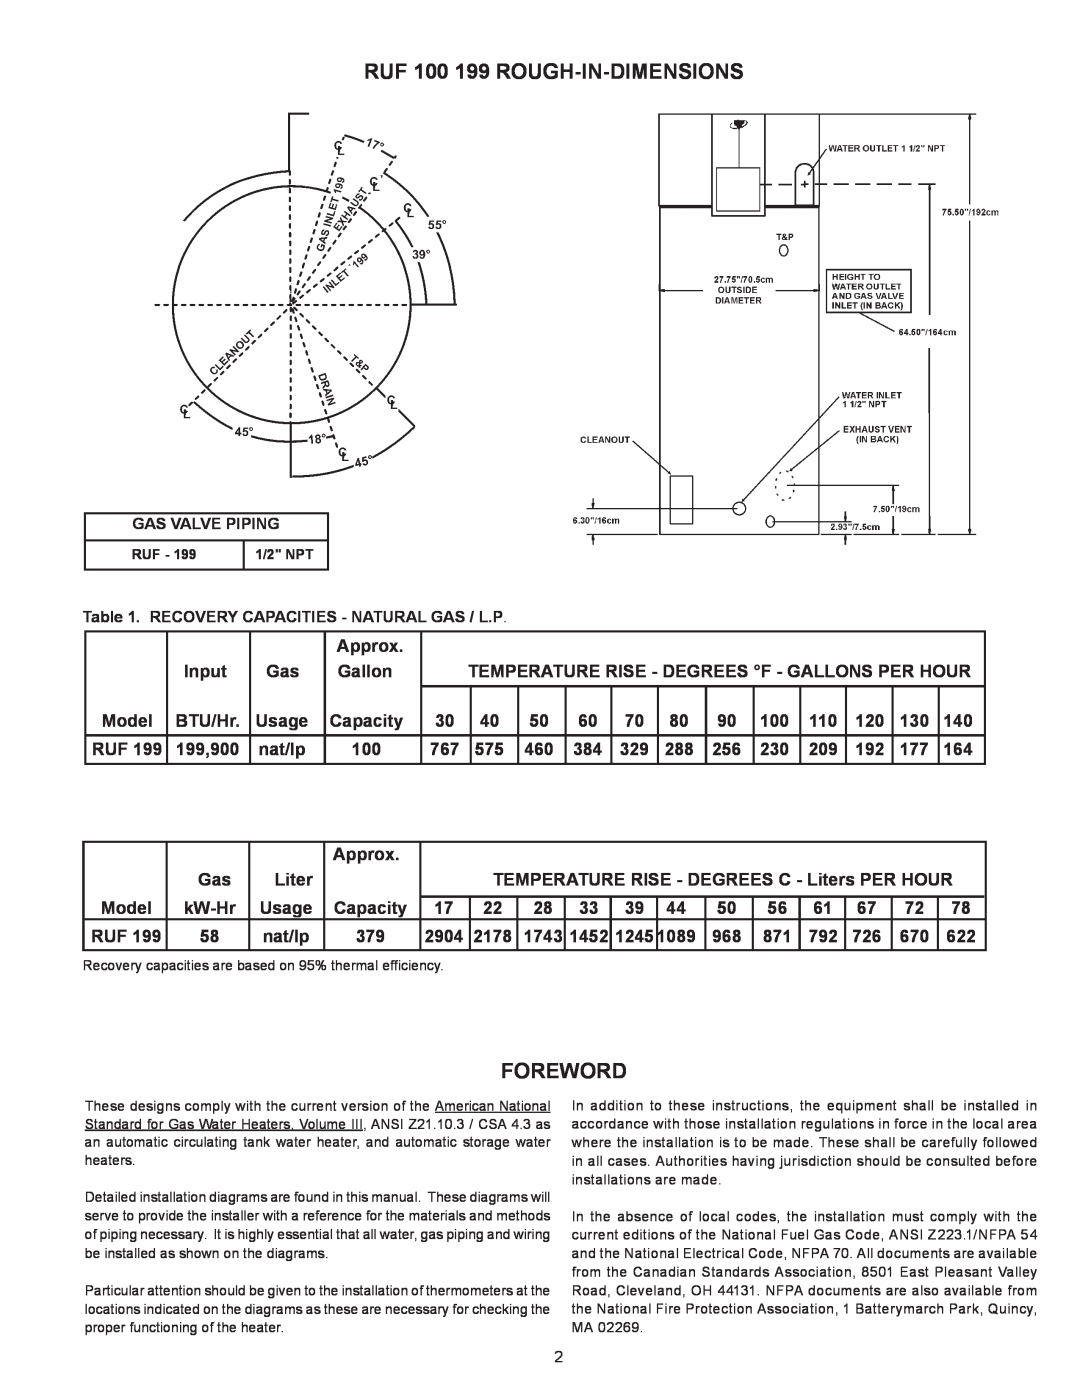 Reliance Water Heaters RUF 100 199 SERIES 101 RUF 100 199 ROUGH-IN-DIMENSIONS, Foreword, Approx, Input, Gallon, BTU/Hr 